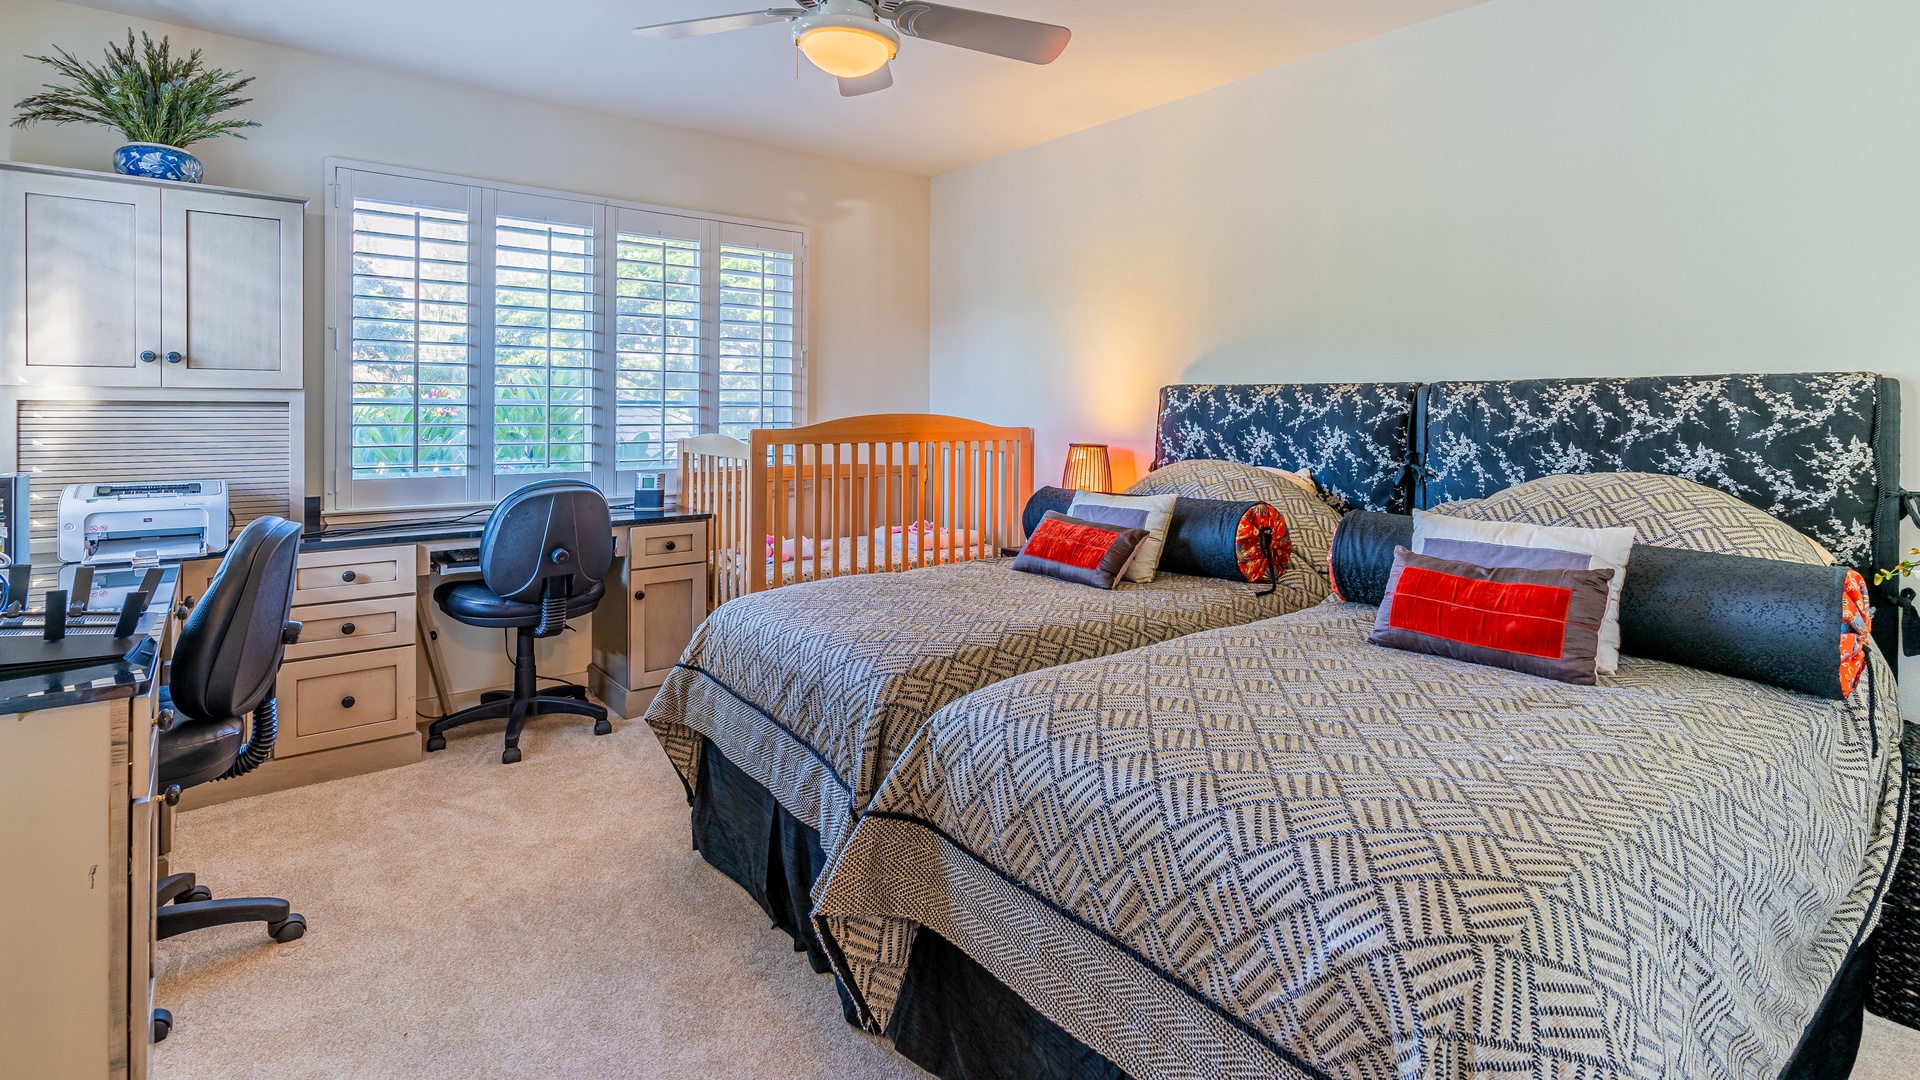 Kapolei Vacation Rentals, Kai Lani 16C - The spacious second guest bedroom with two beds and a desk.